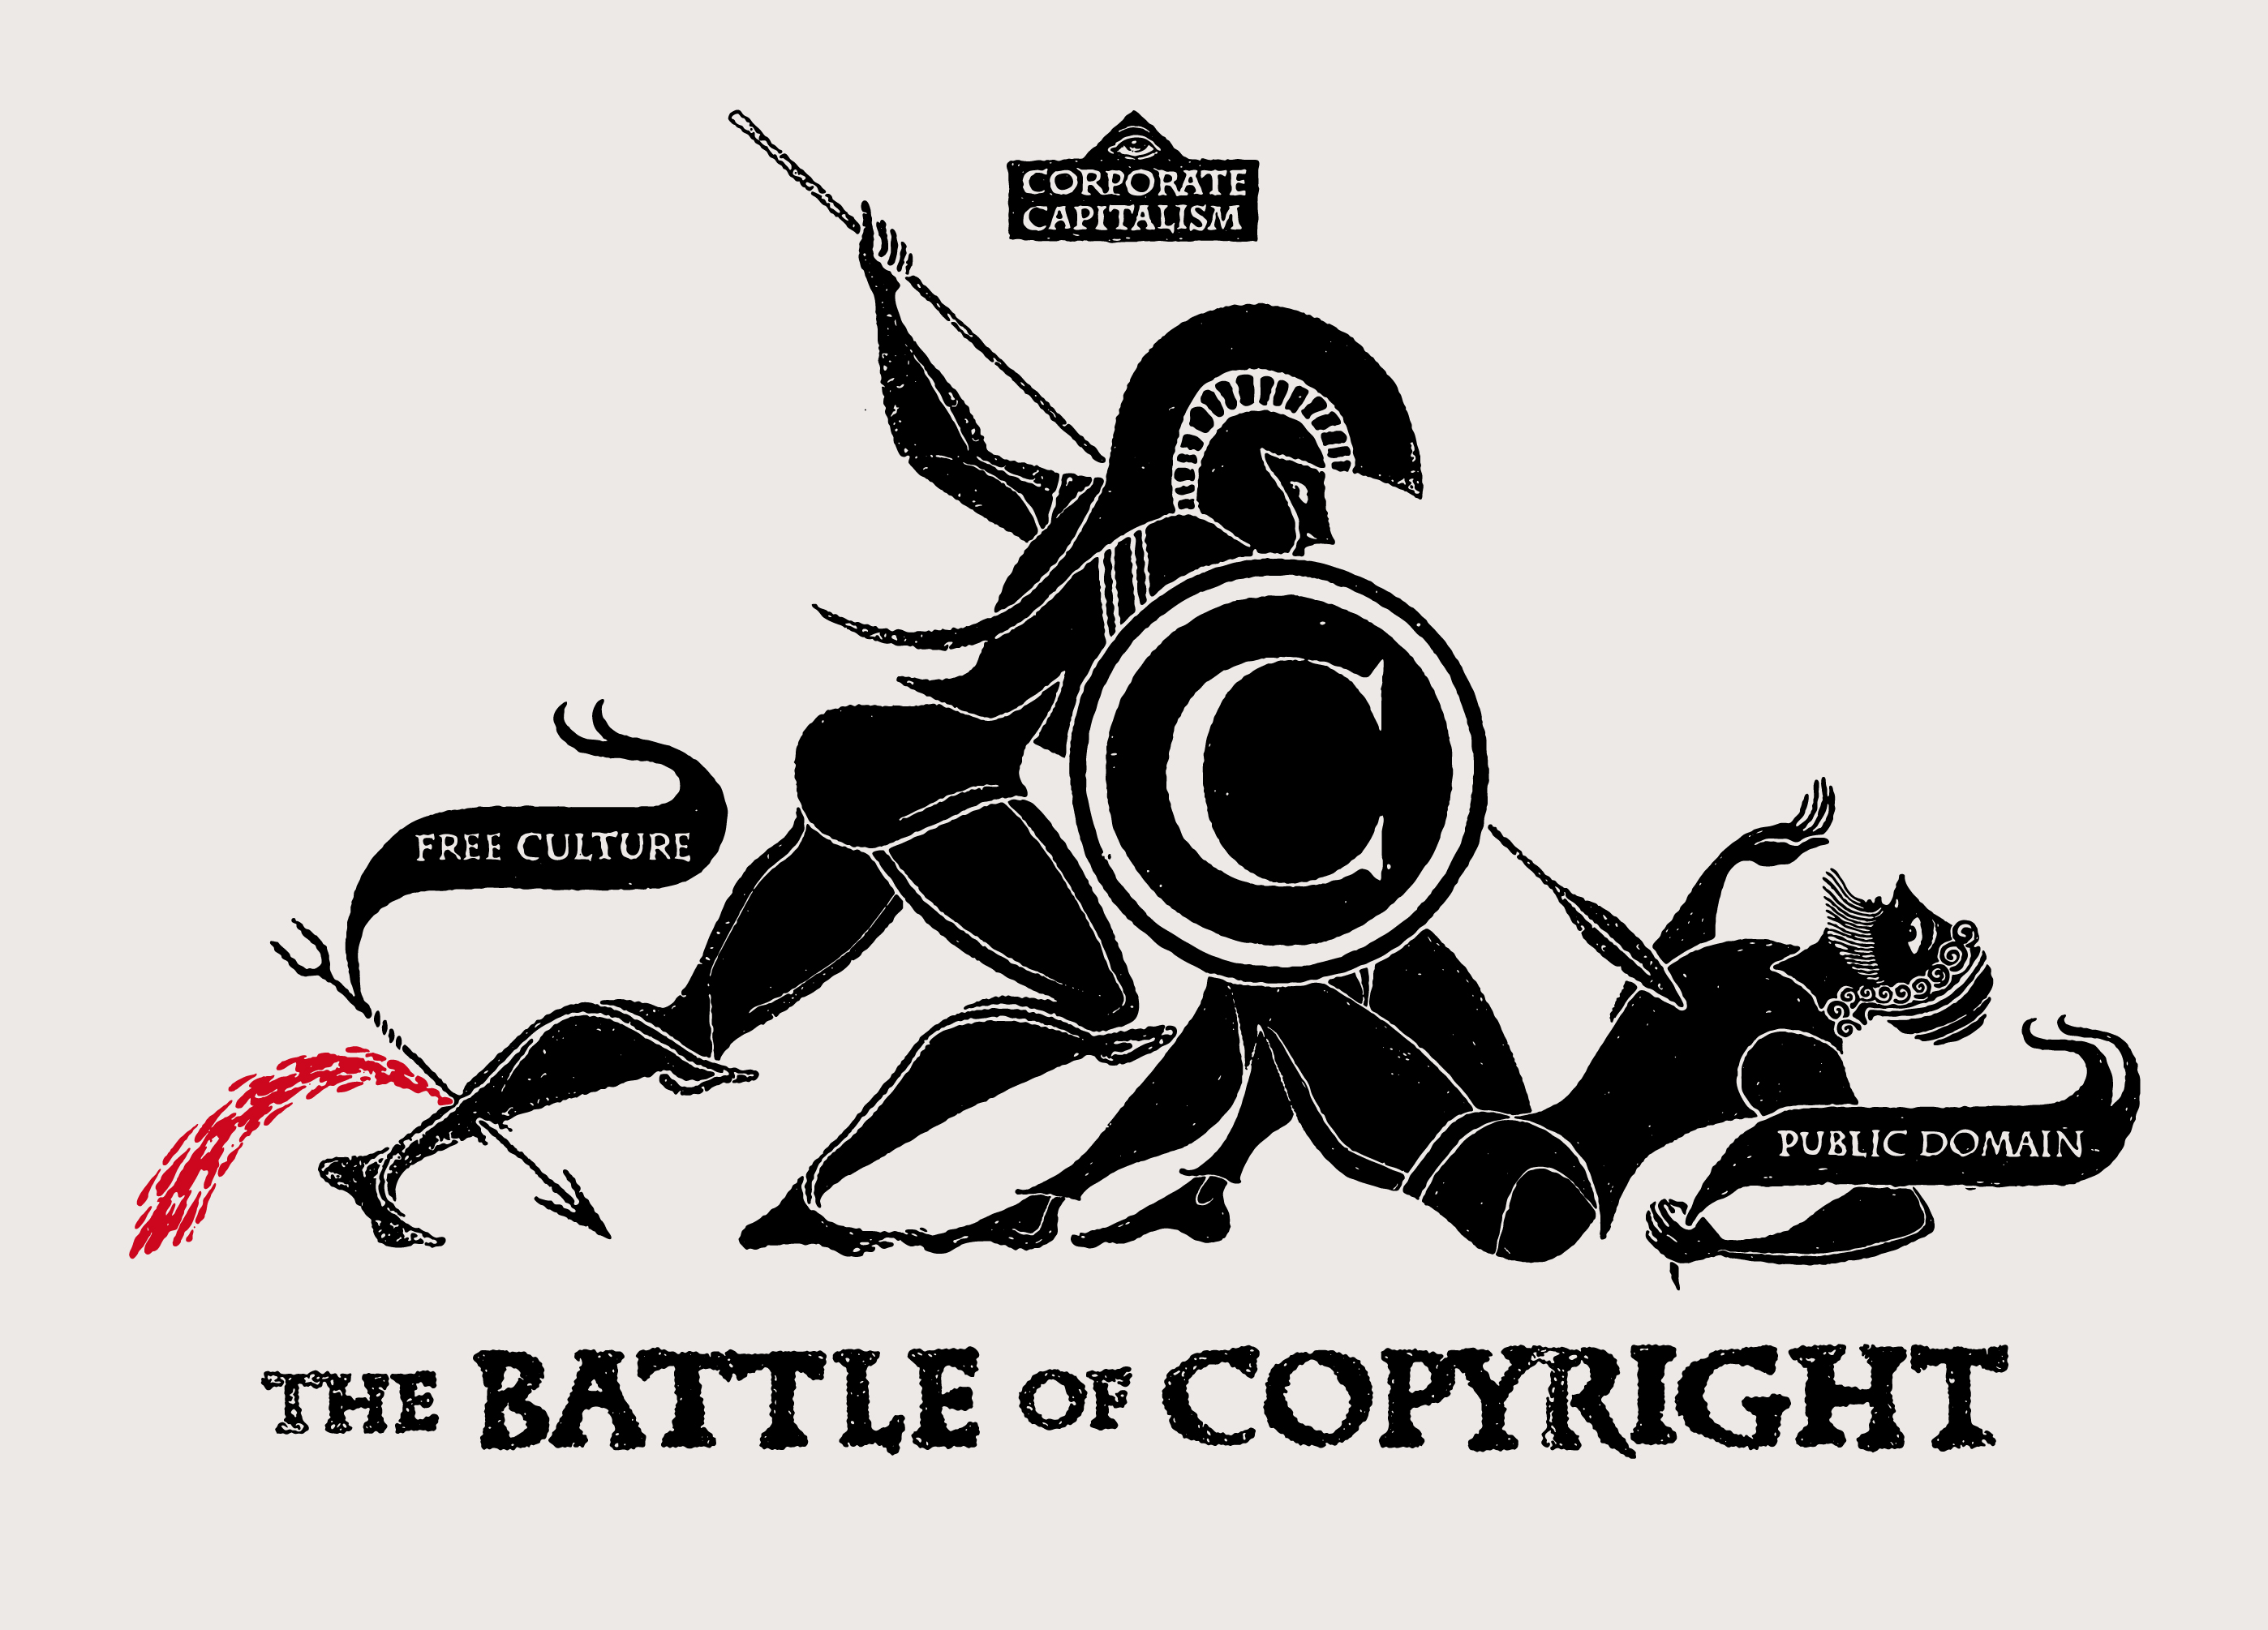 THE BATTLE OF COPYRIGHT